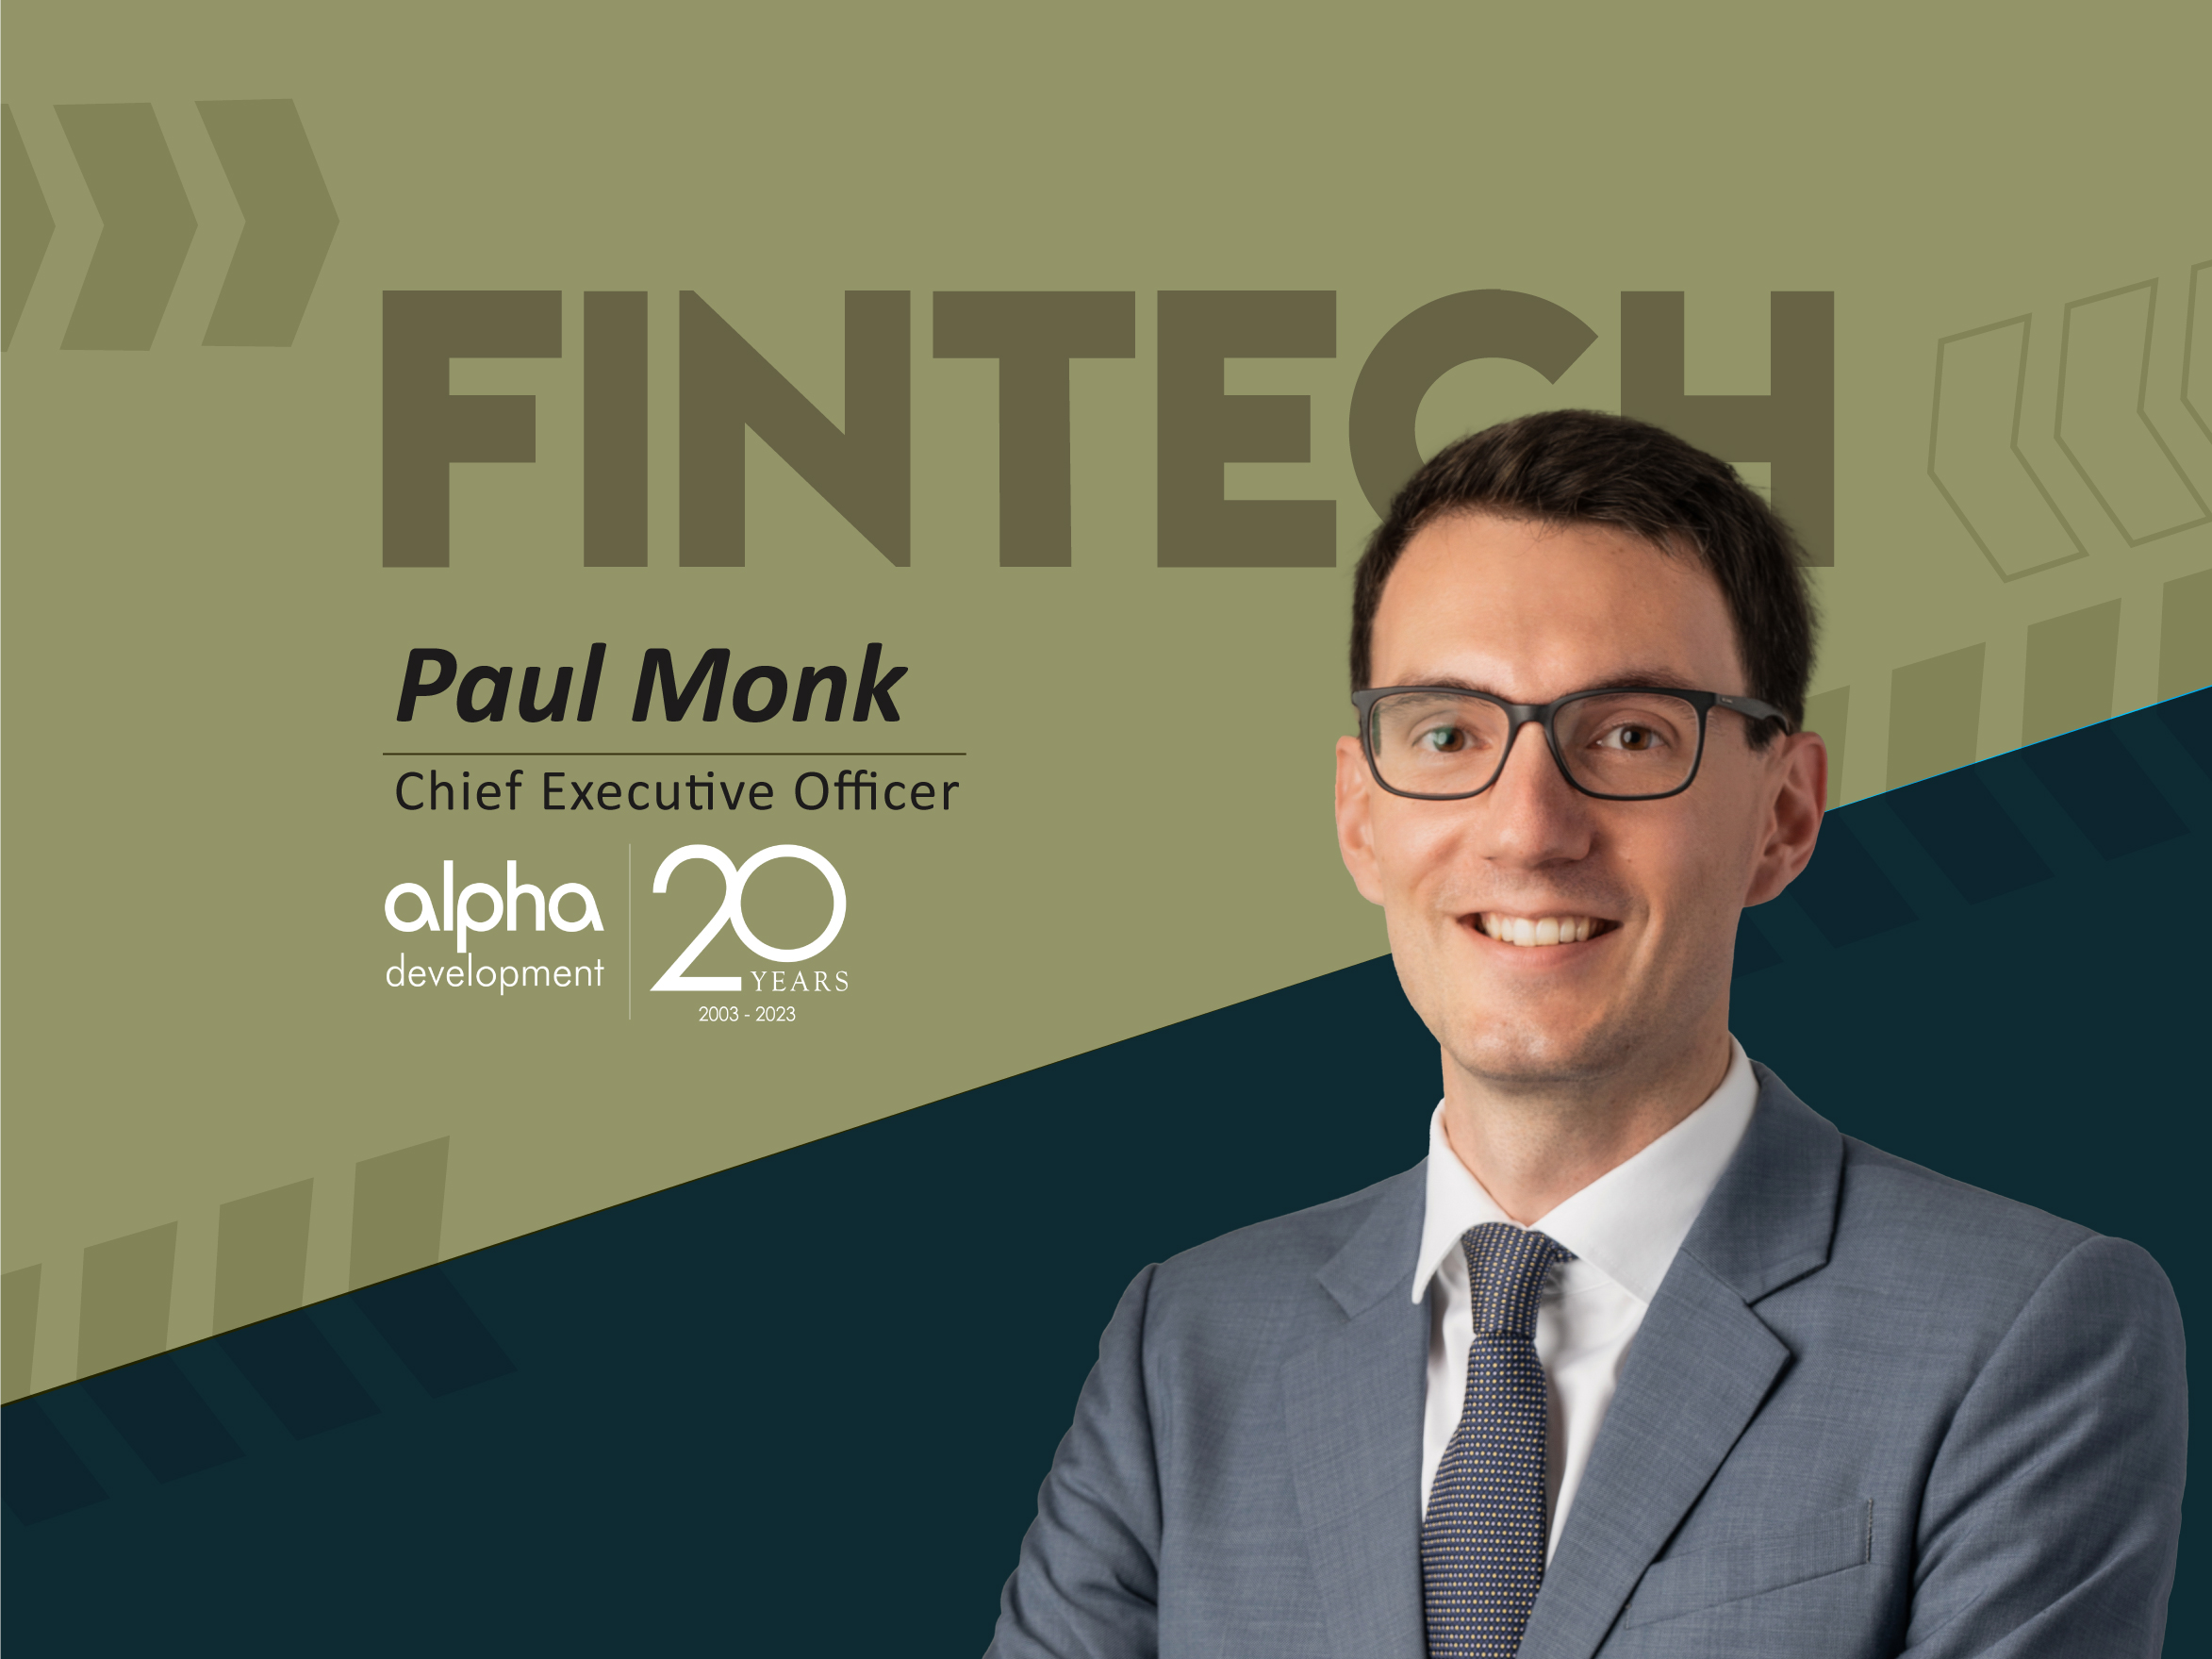 Global Fintech Interview with Paul Monk, Chief Executive Officer at Alpha Development